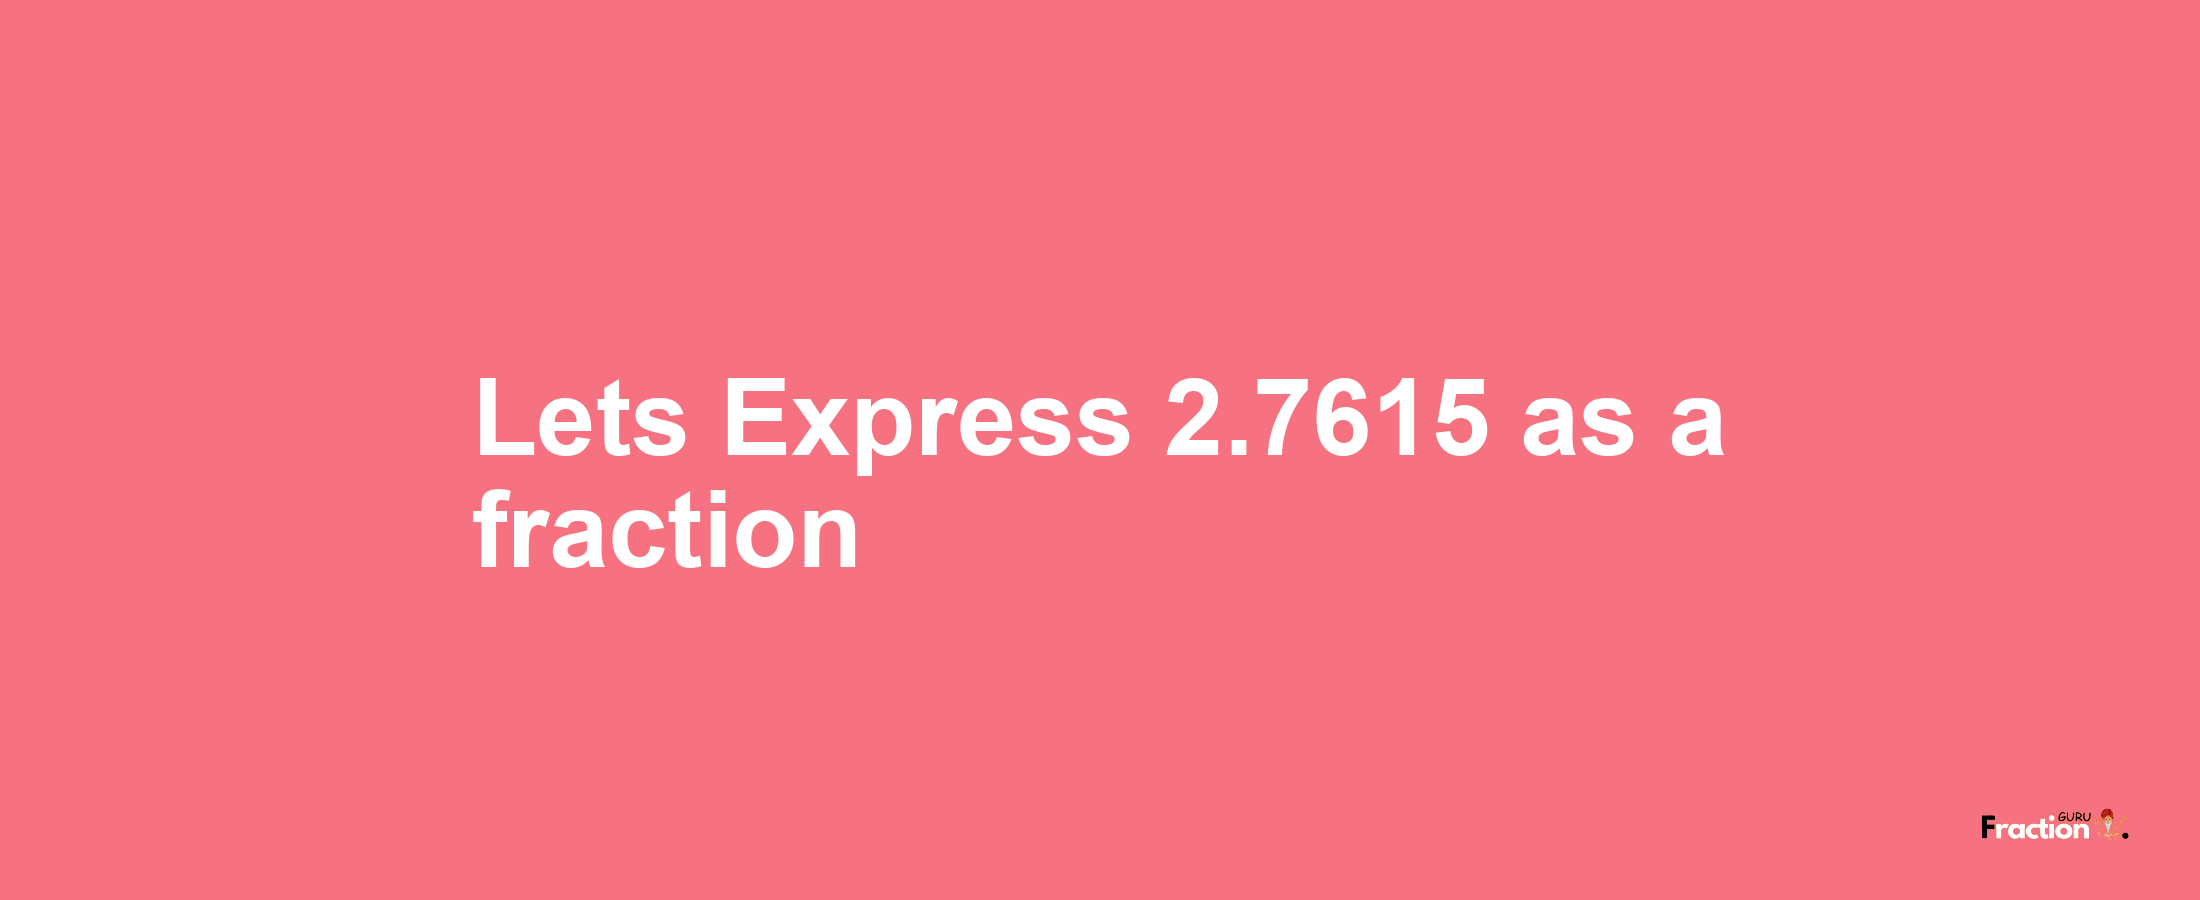 Lets Express 2.7615 as afraction